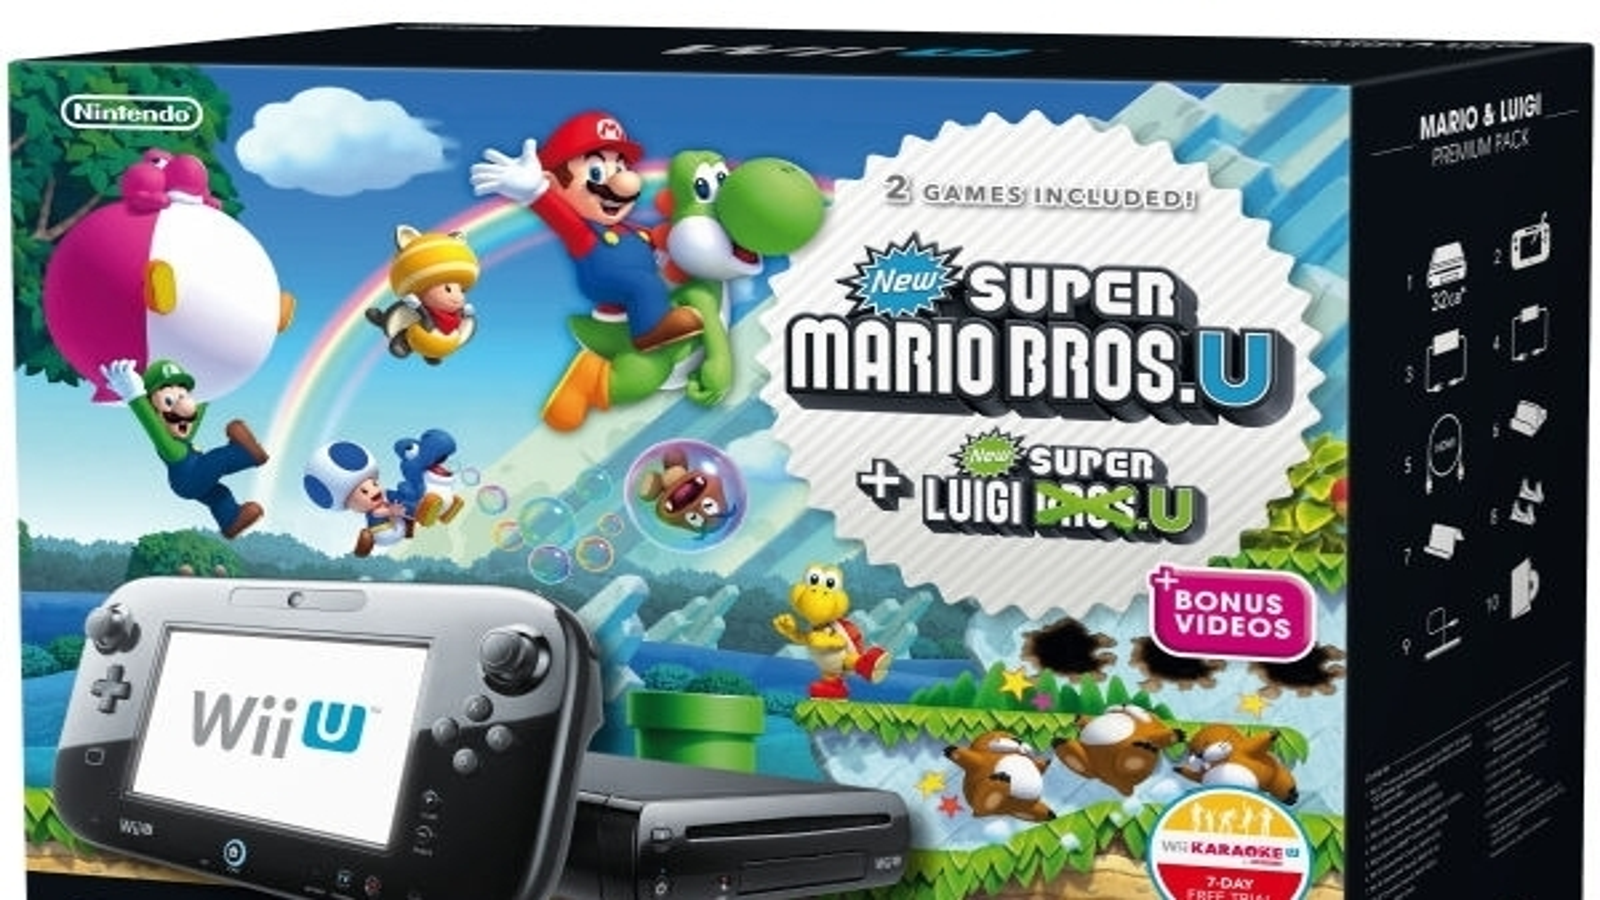 New Super Mario Bros Wii is out now on Wii U